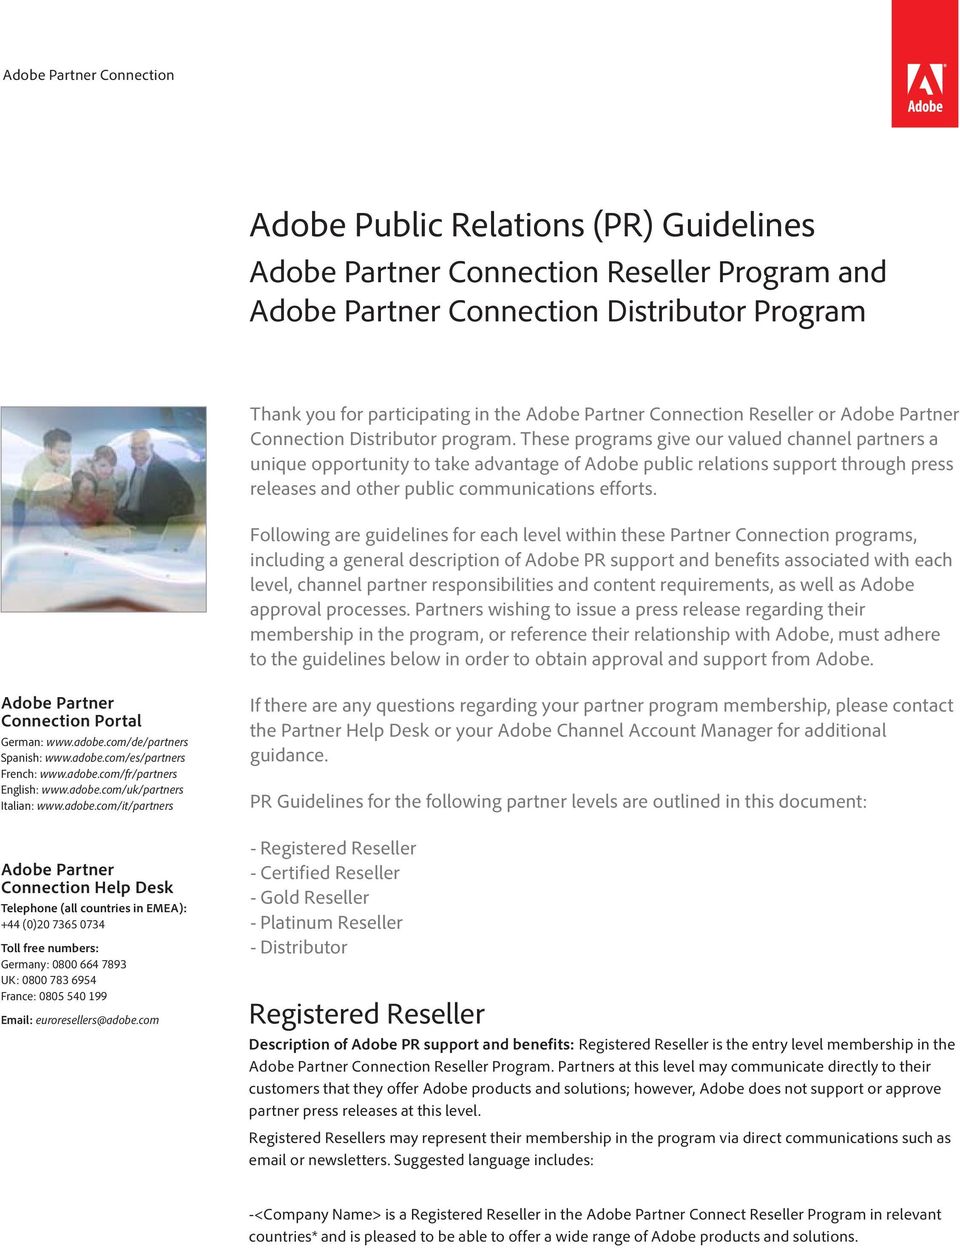 These programs give our valued channel partners a unique opportunity to take advantage of Adobe public relations support through press releases and other public communications efforts.